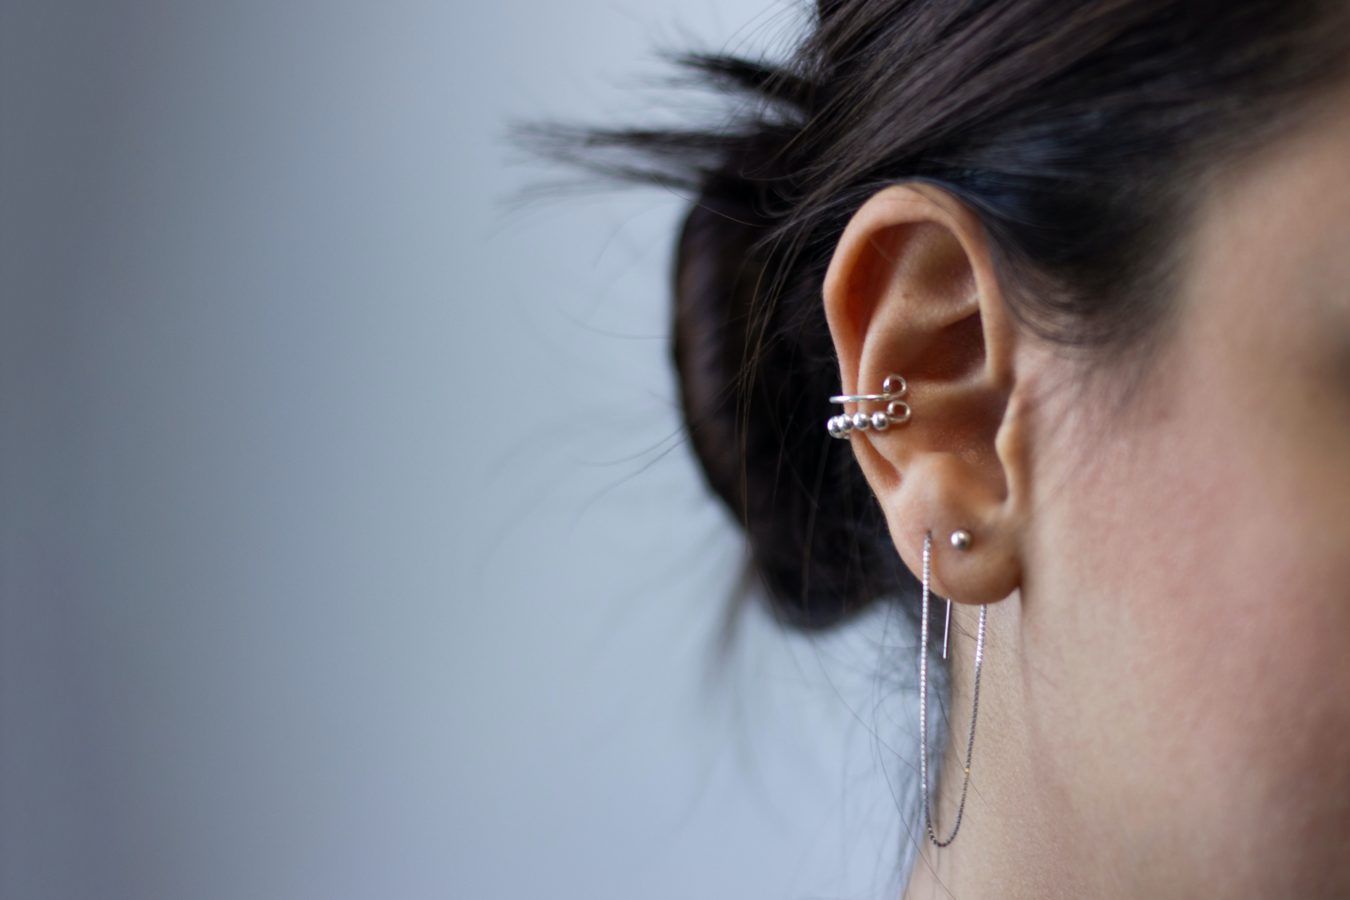 The coolest ear piercing trends of 2022